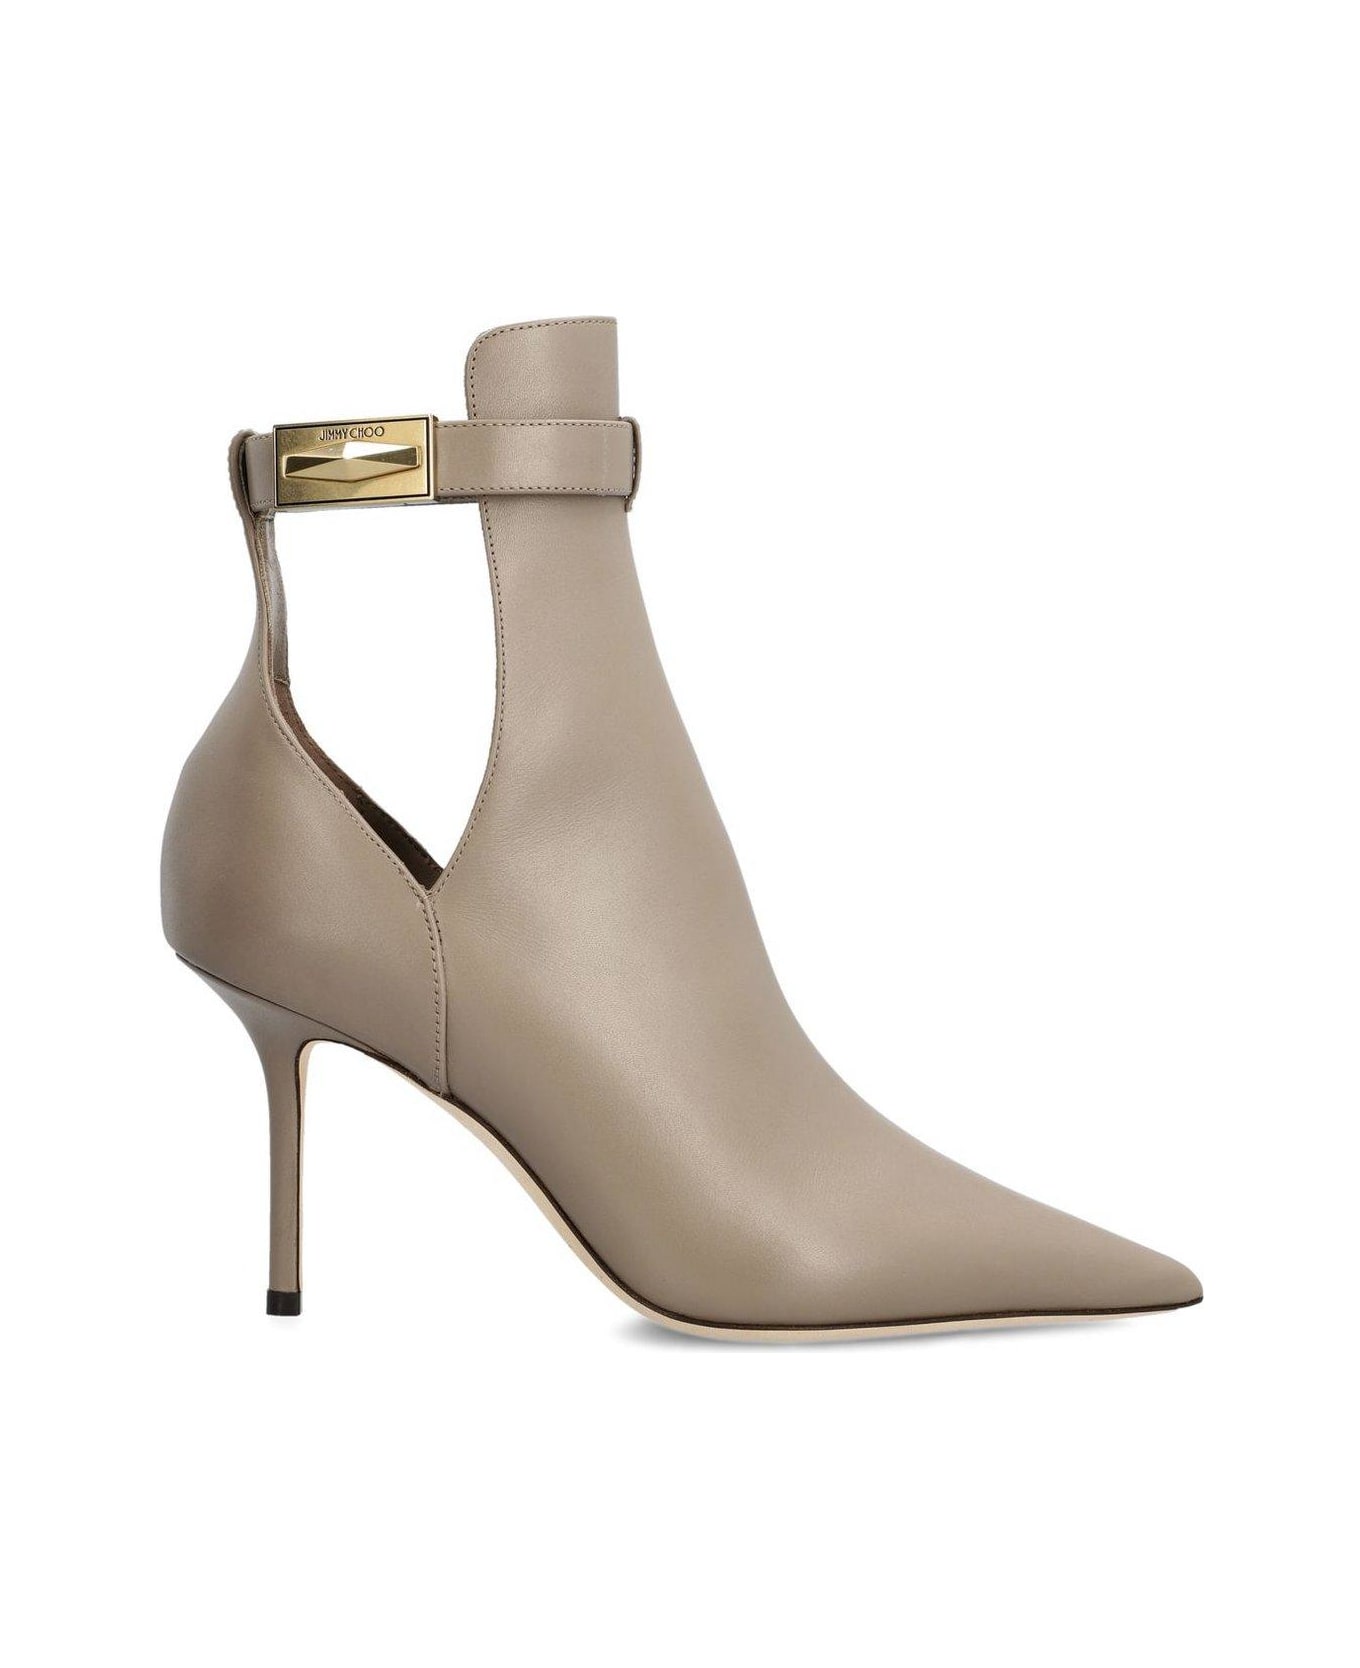 Jimmy Choo Nell 85 Cut-out Pointed-toe Ankle Boots - Dove Grey ブーツ